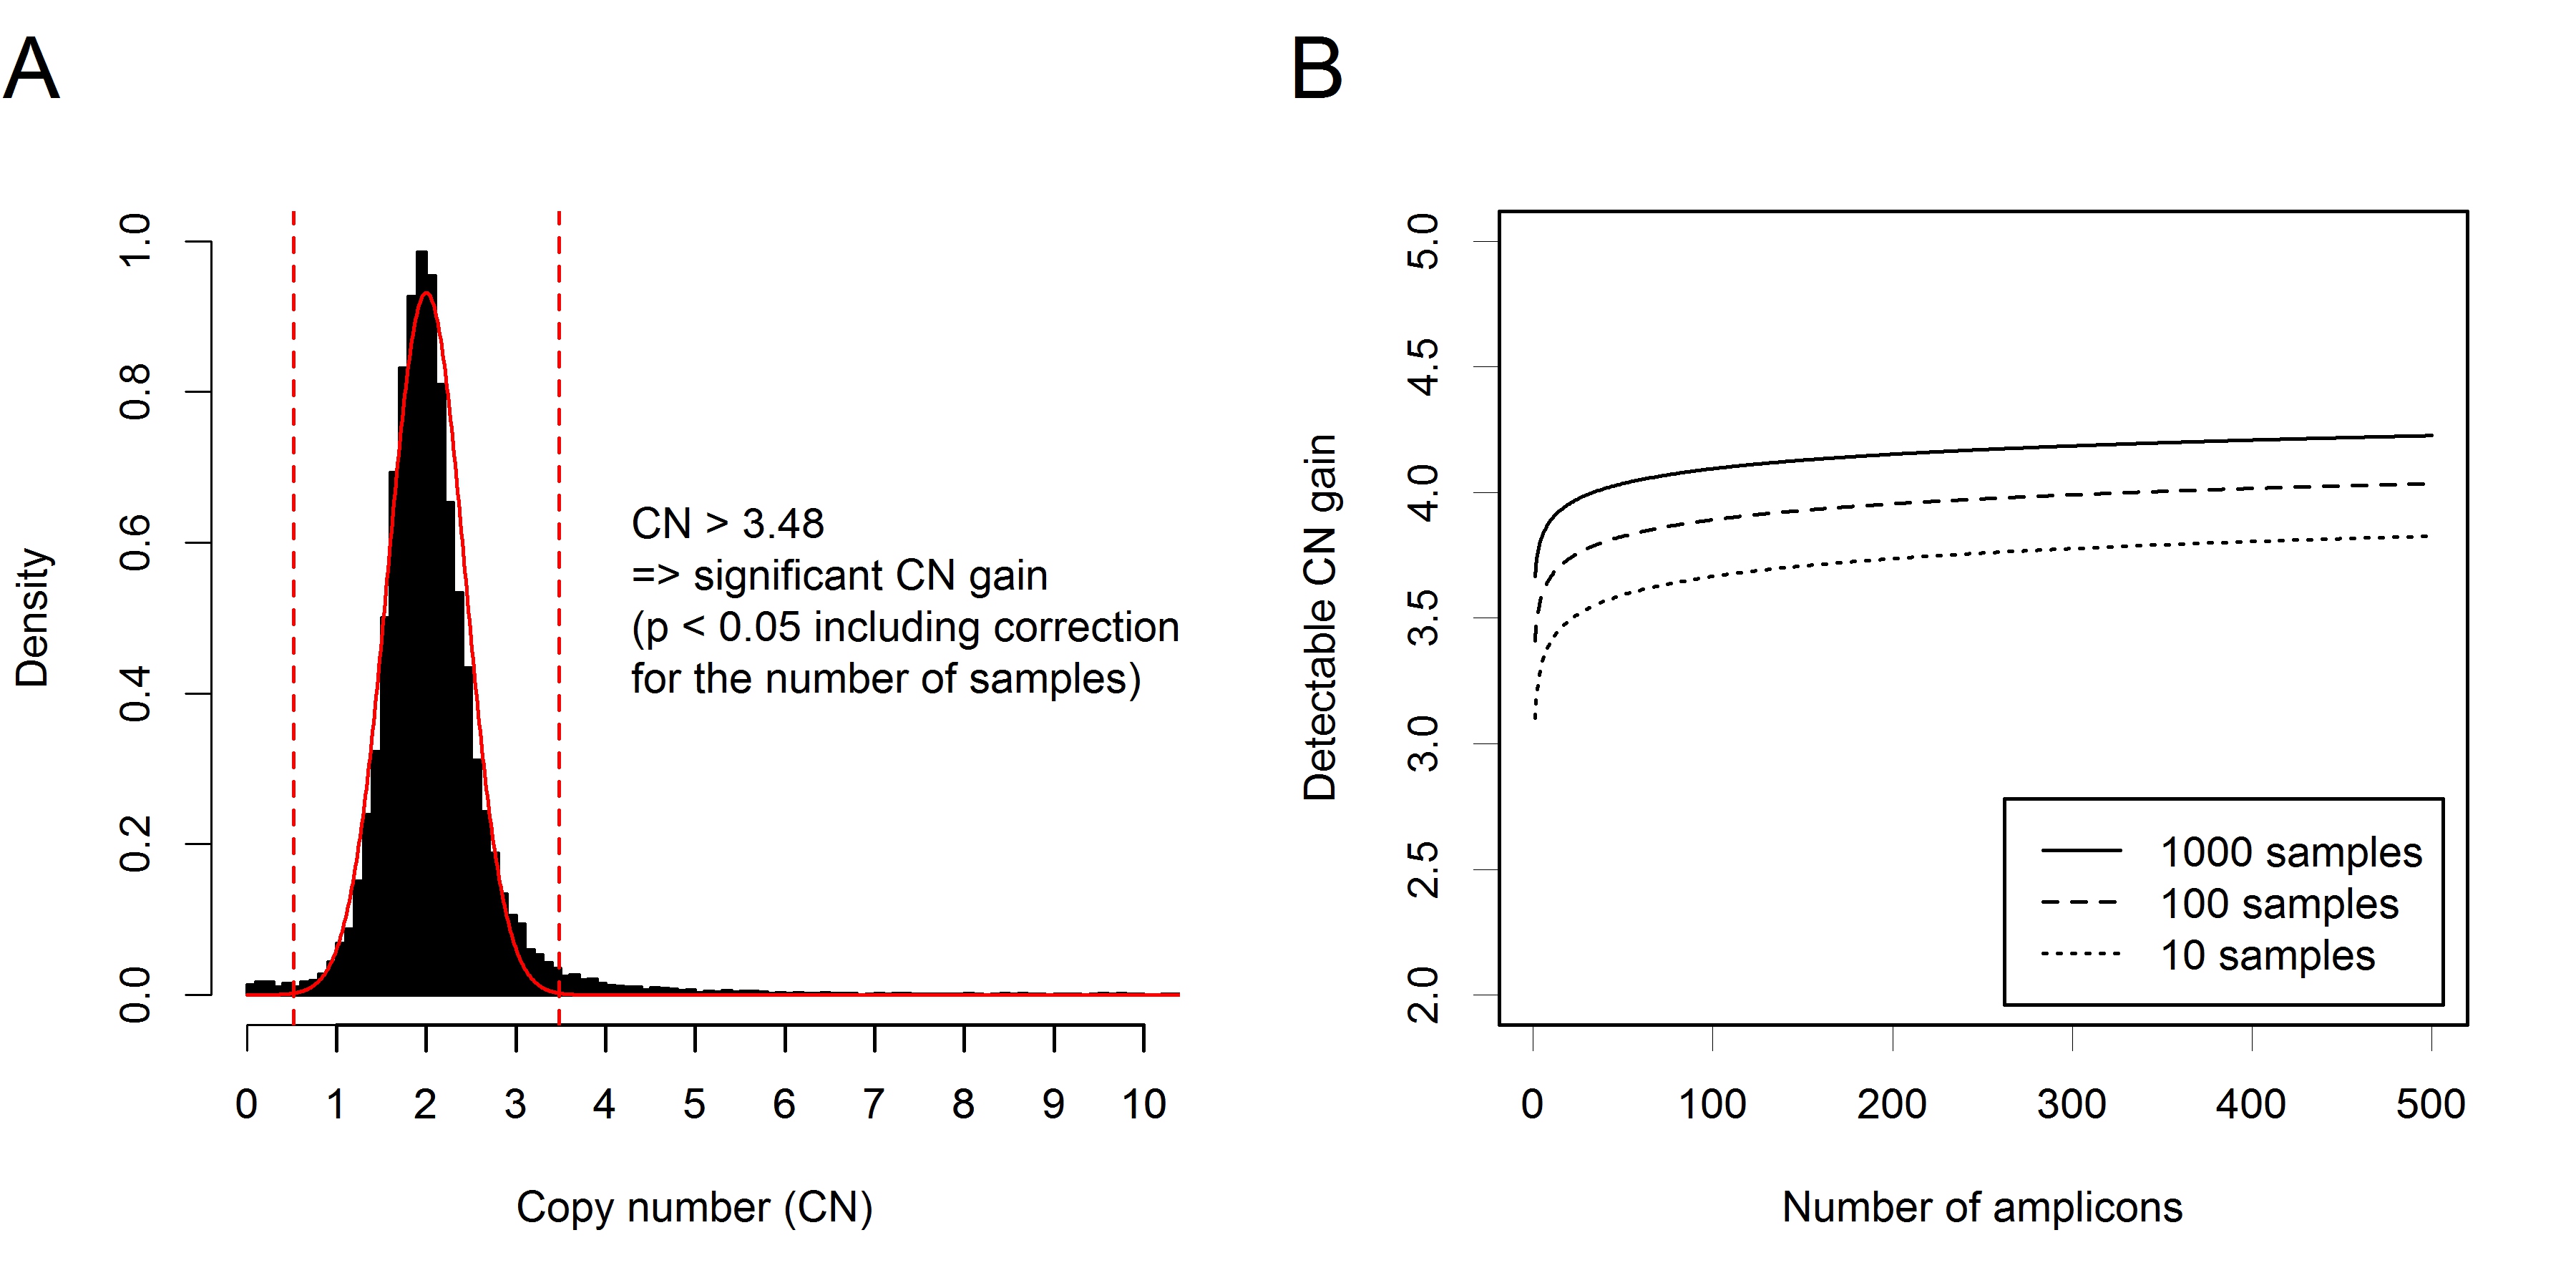 Ioncopy algorithm for detection and significance assessment of CNAs in amplicon sequencing data.